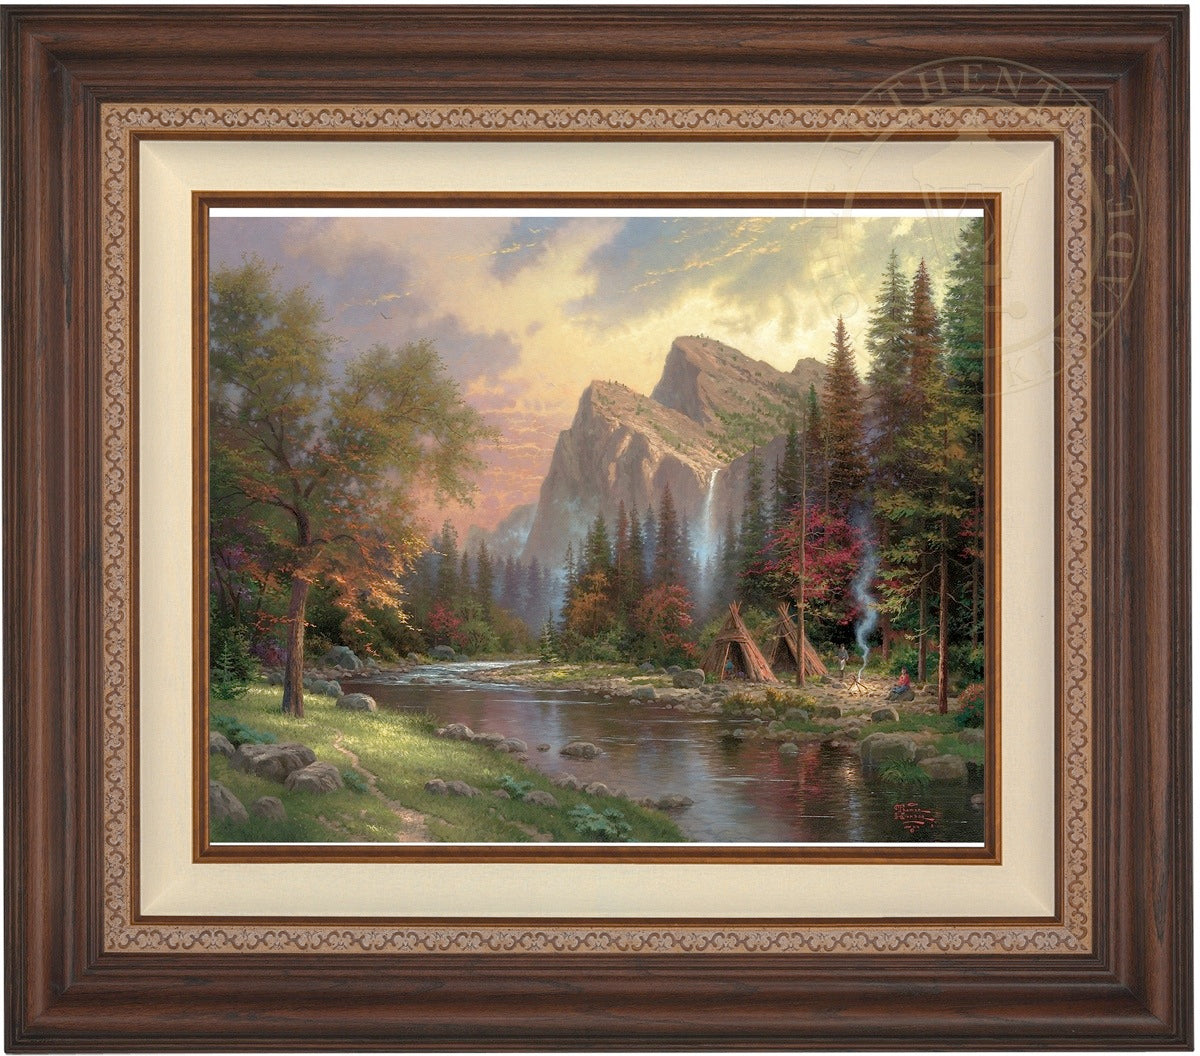 The Mountains Declare His Glory - Limited Edition Canvas – Thomas 